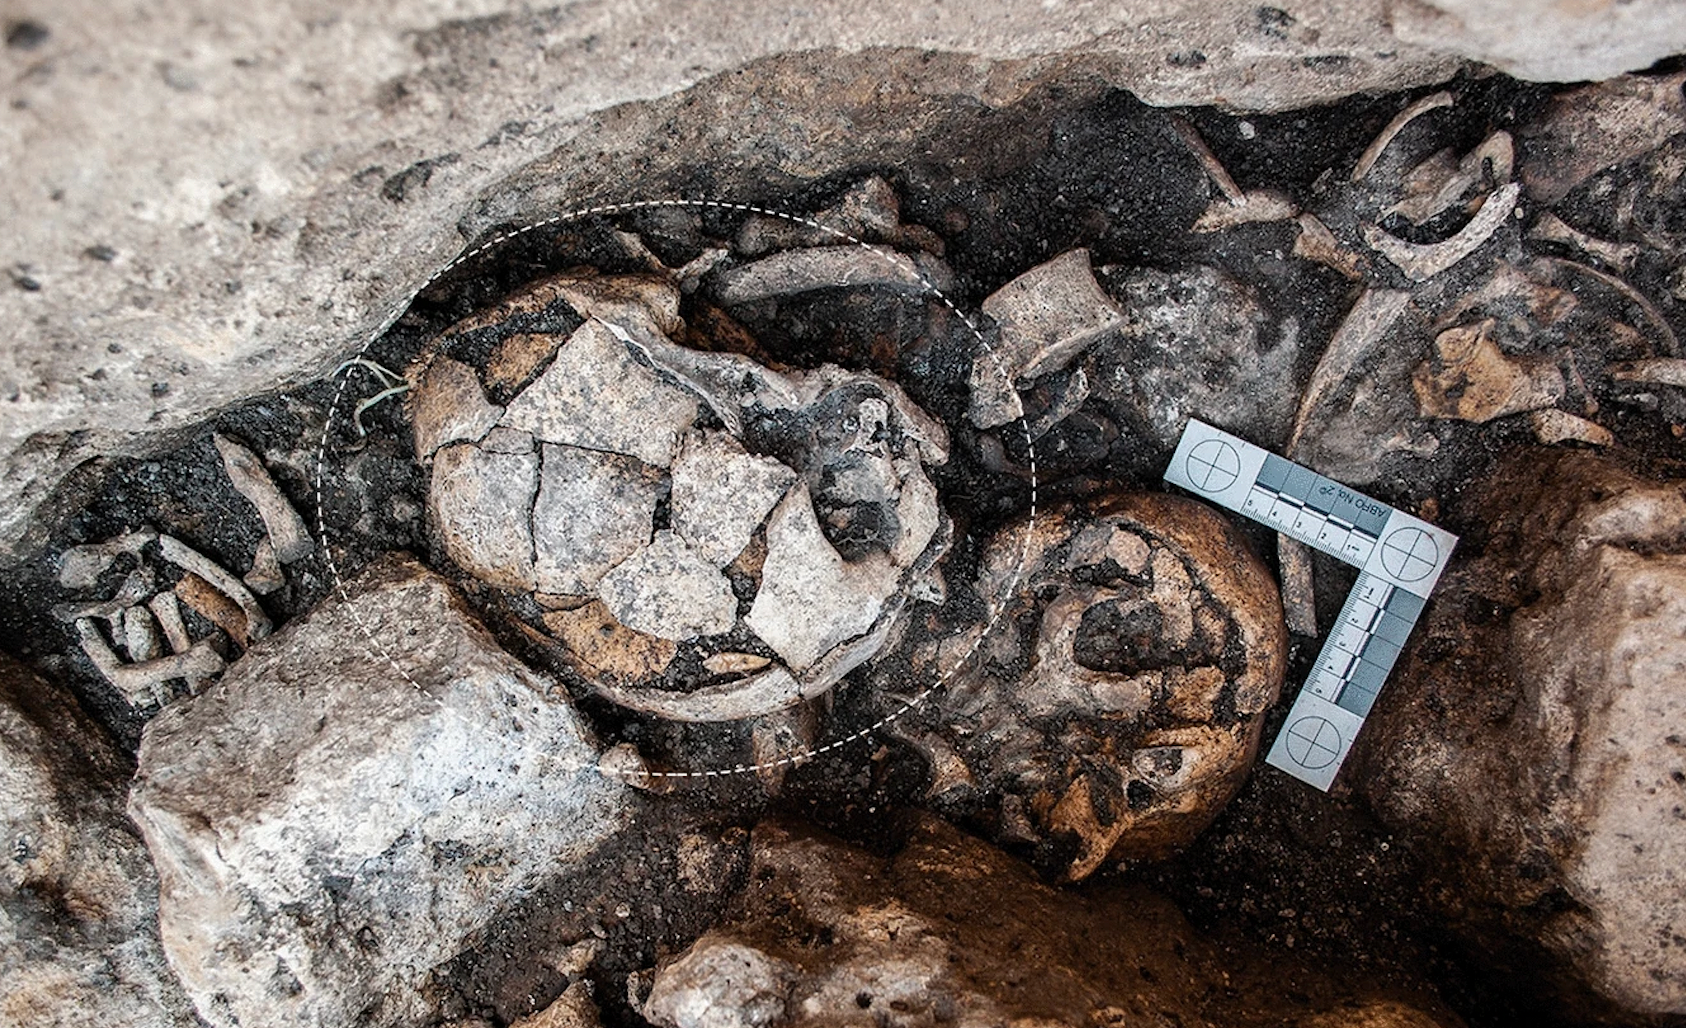 Skull in which the evidence was found, at the El Pendón site